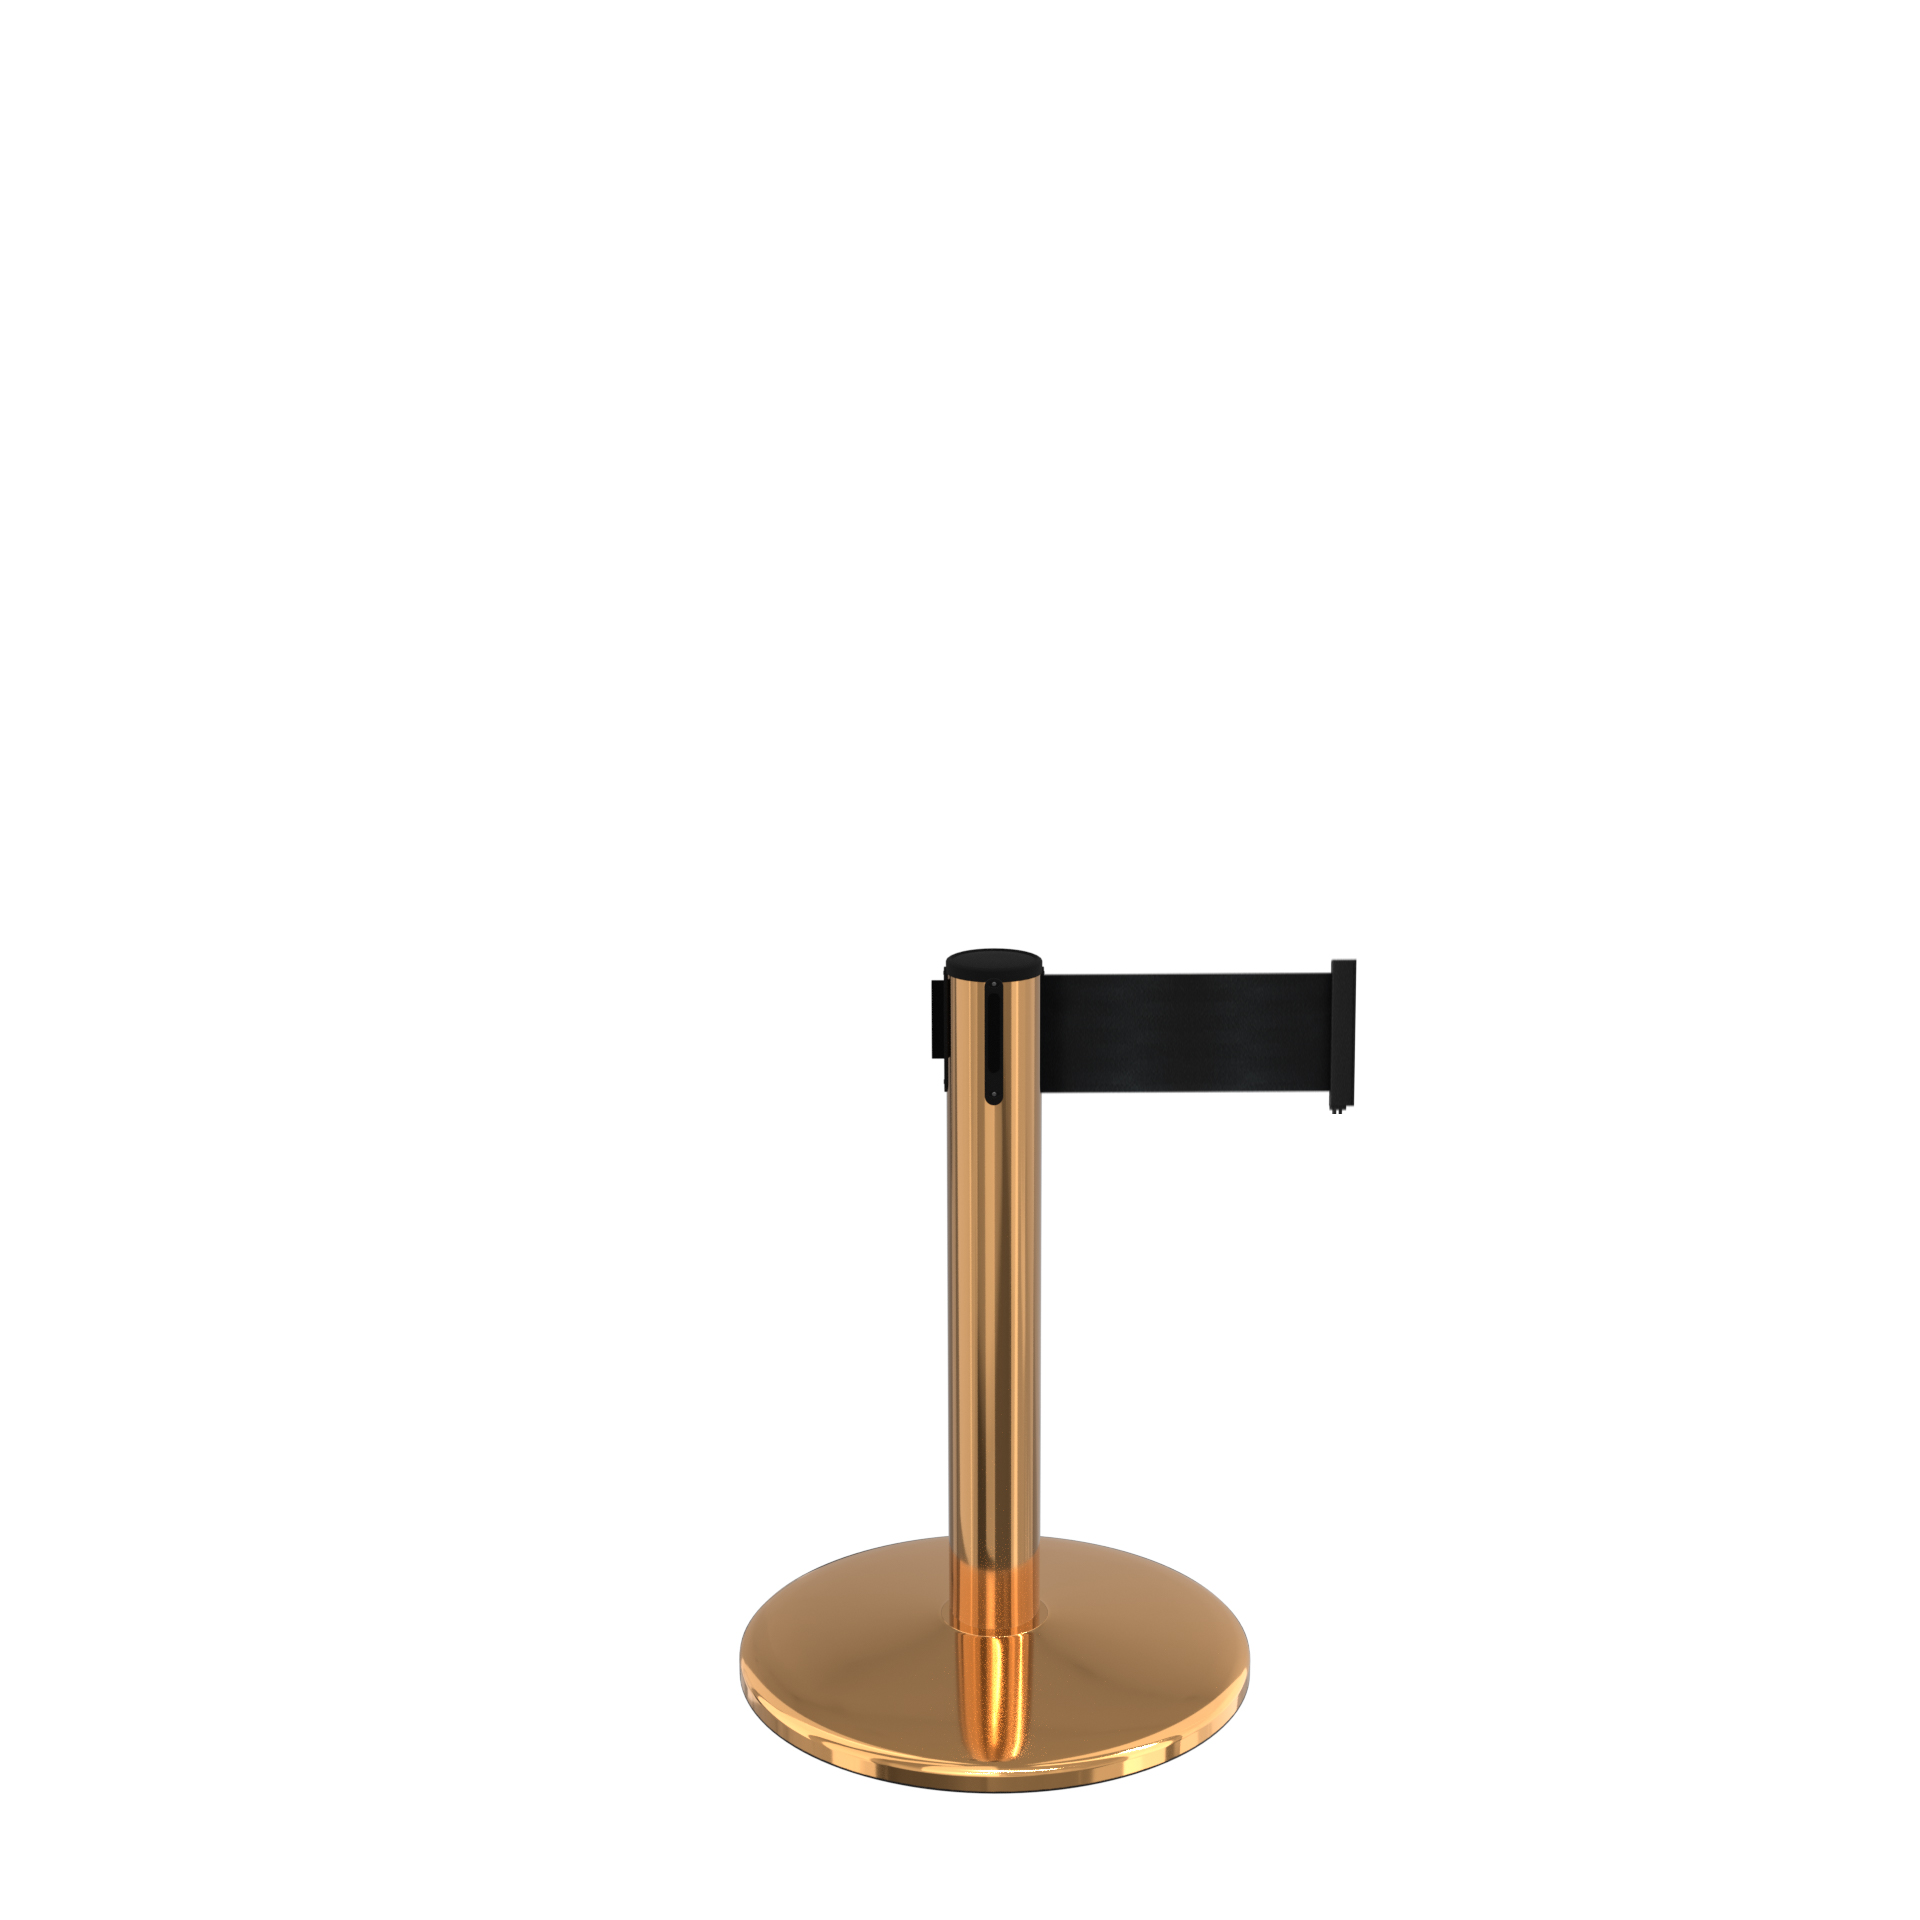 Polished Brass QueuePro 250 Mini Retractable Belt Barrier with 3 Inch Belt